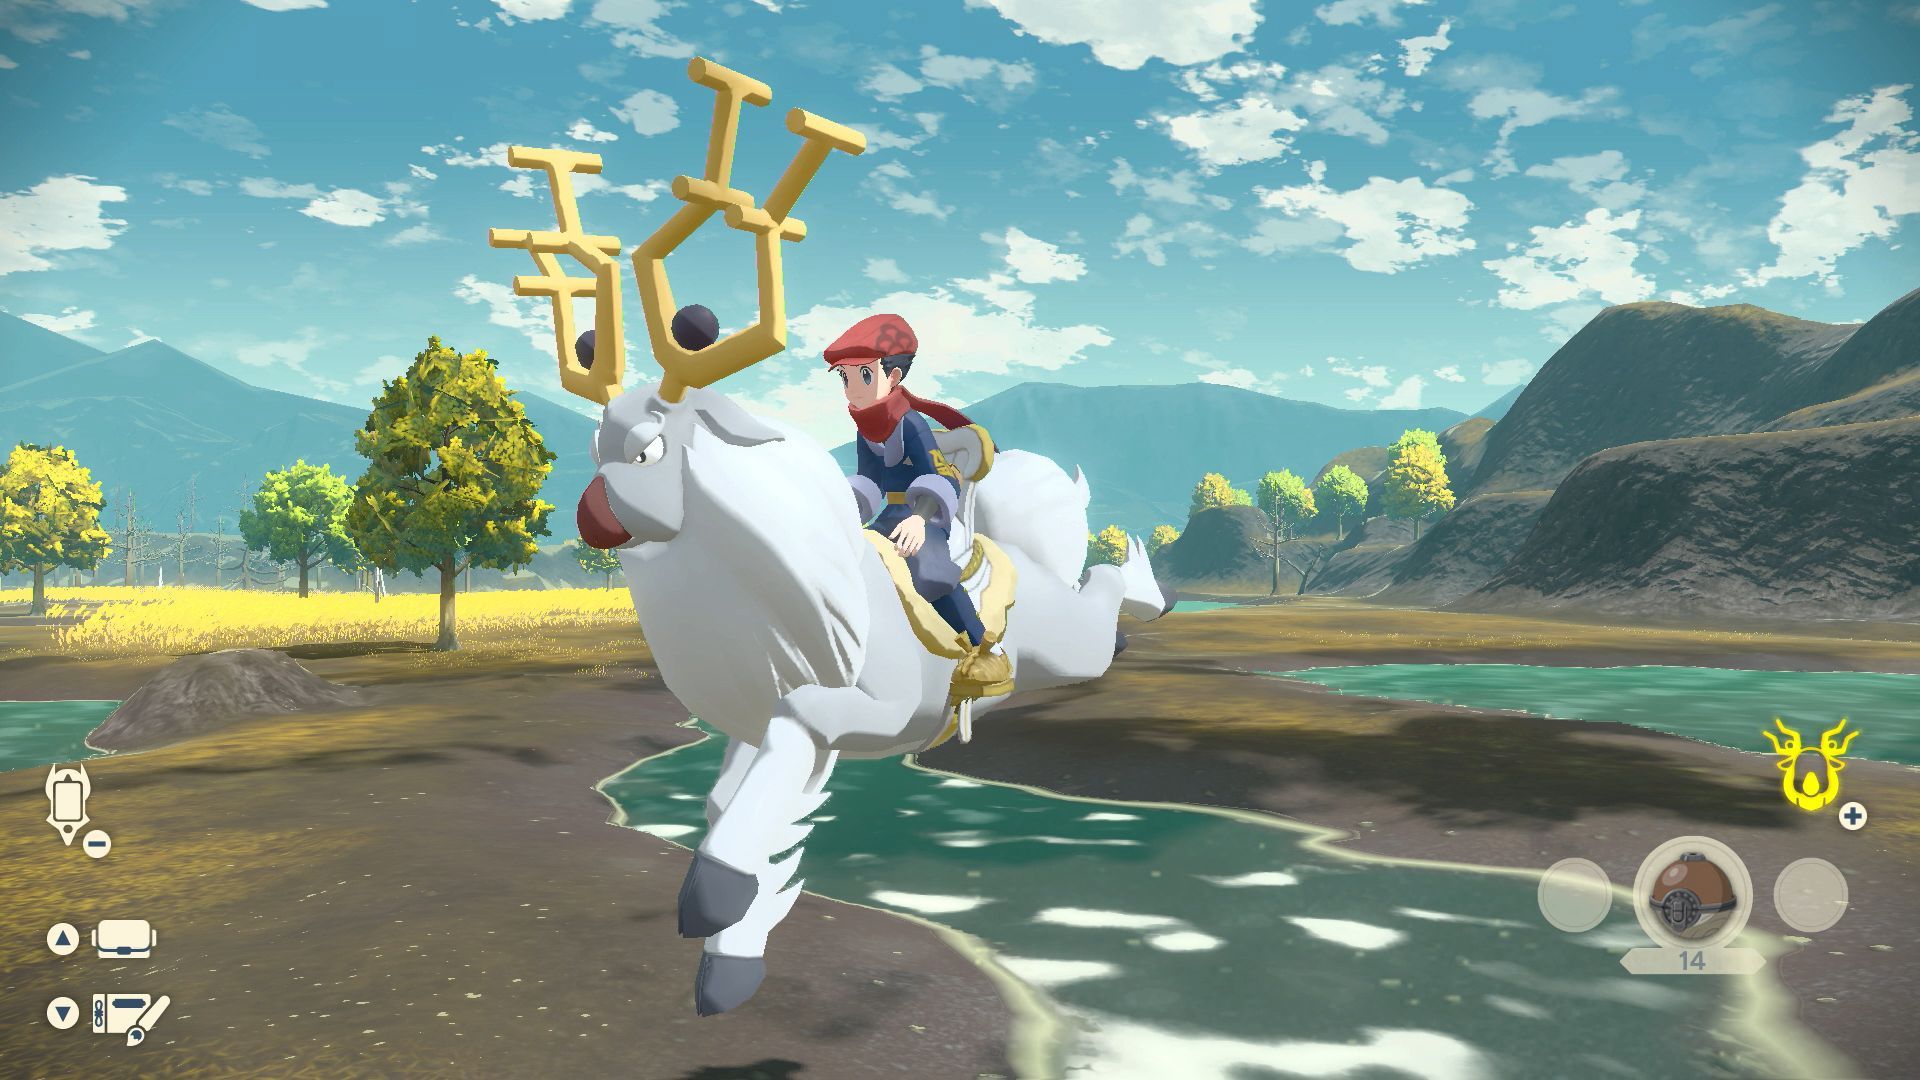 Pokemon Legends Arceus Looks Like A Bad Ps2 Game But Who Really Cares Saveupdata Com